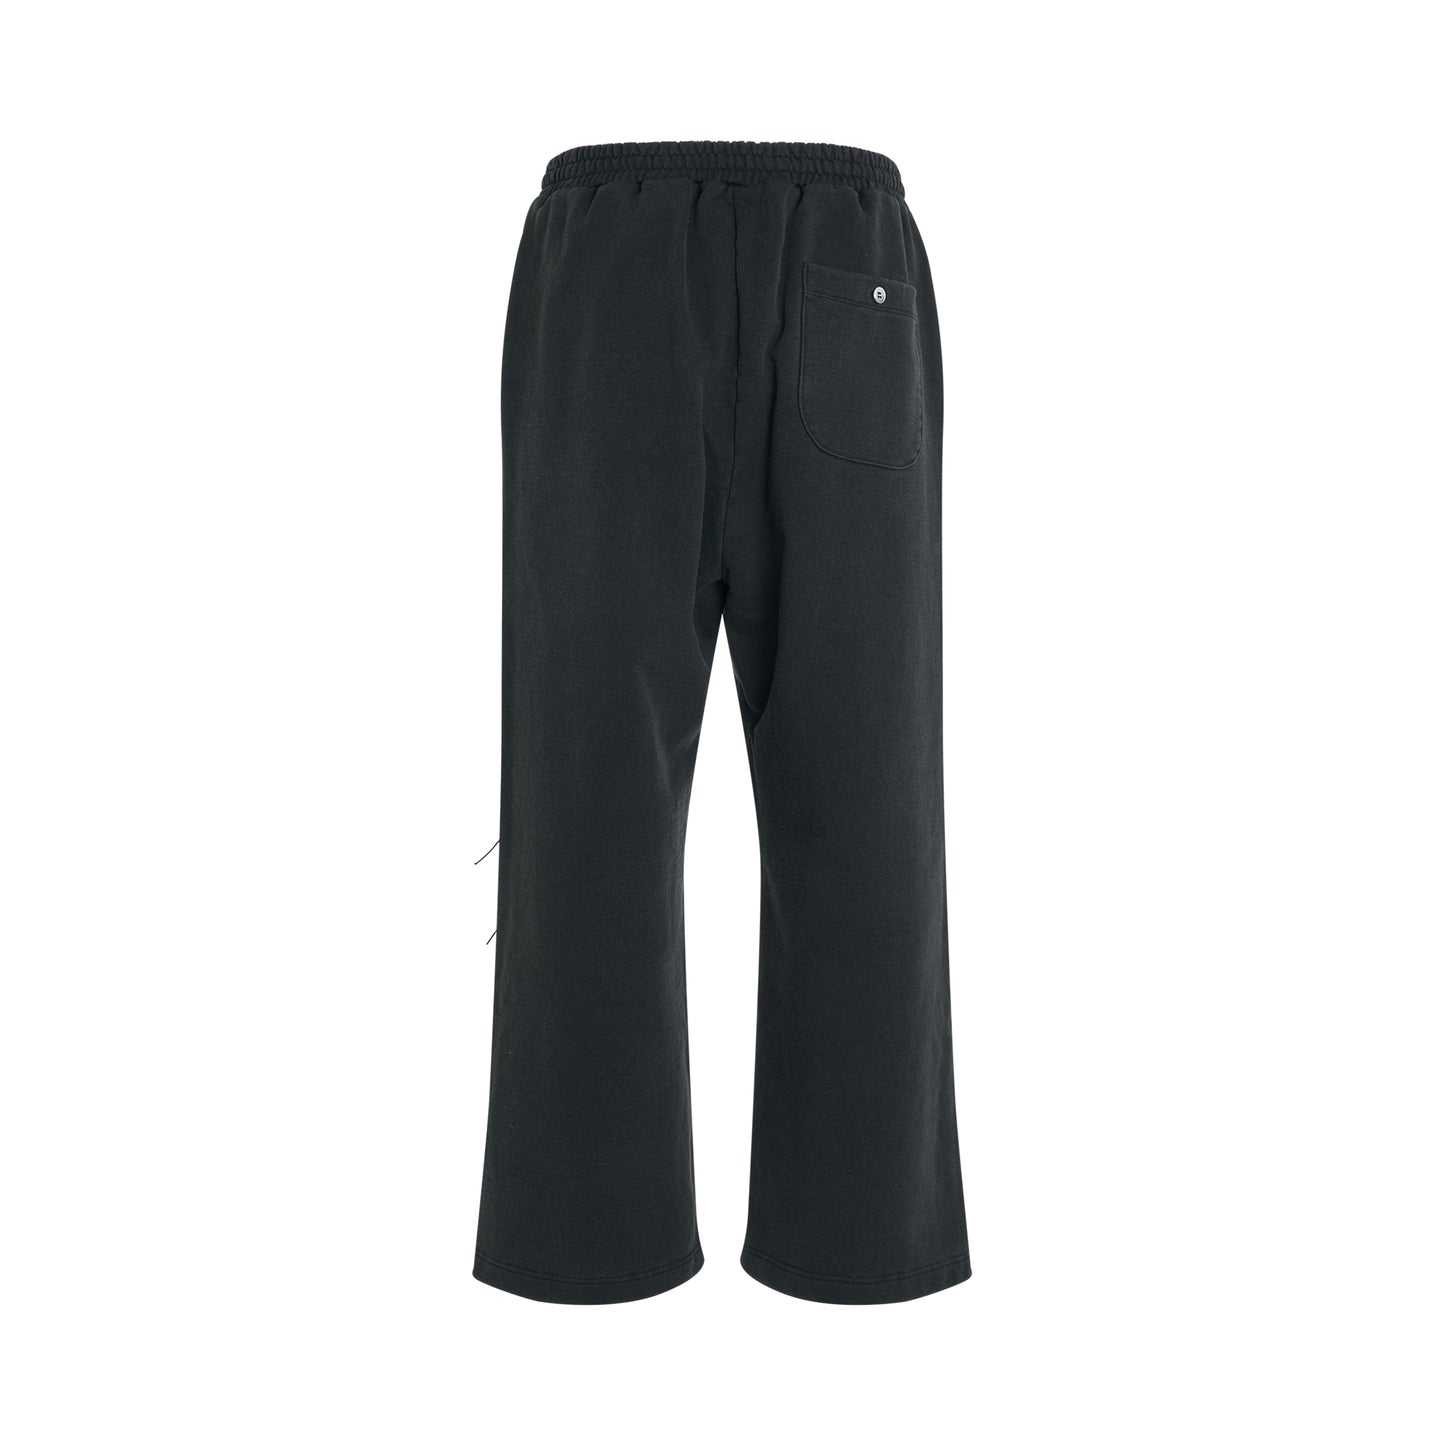 RCA Cable Embroidery Sweatpants in Black